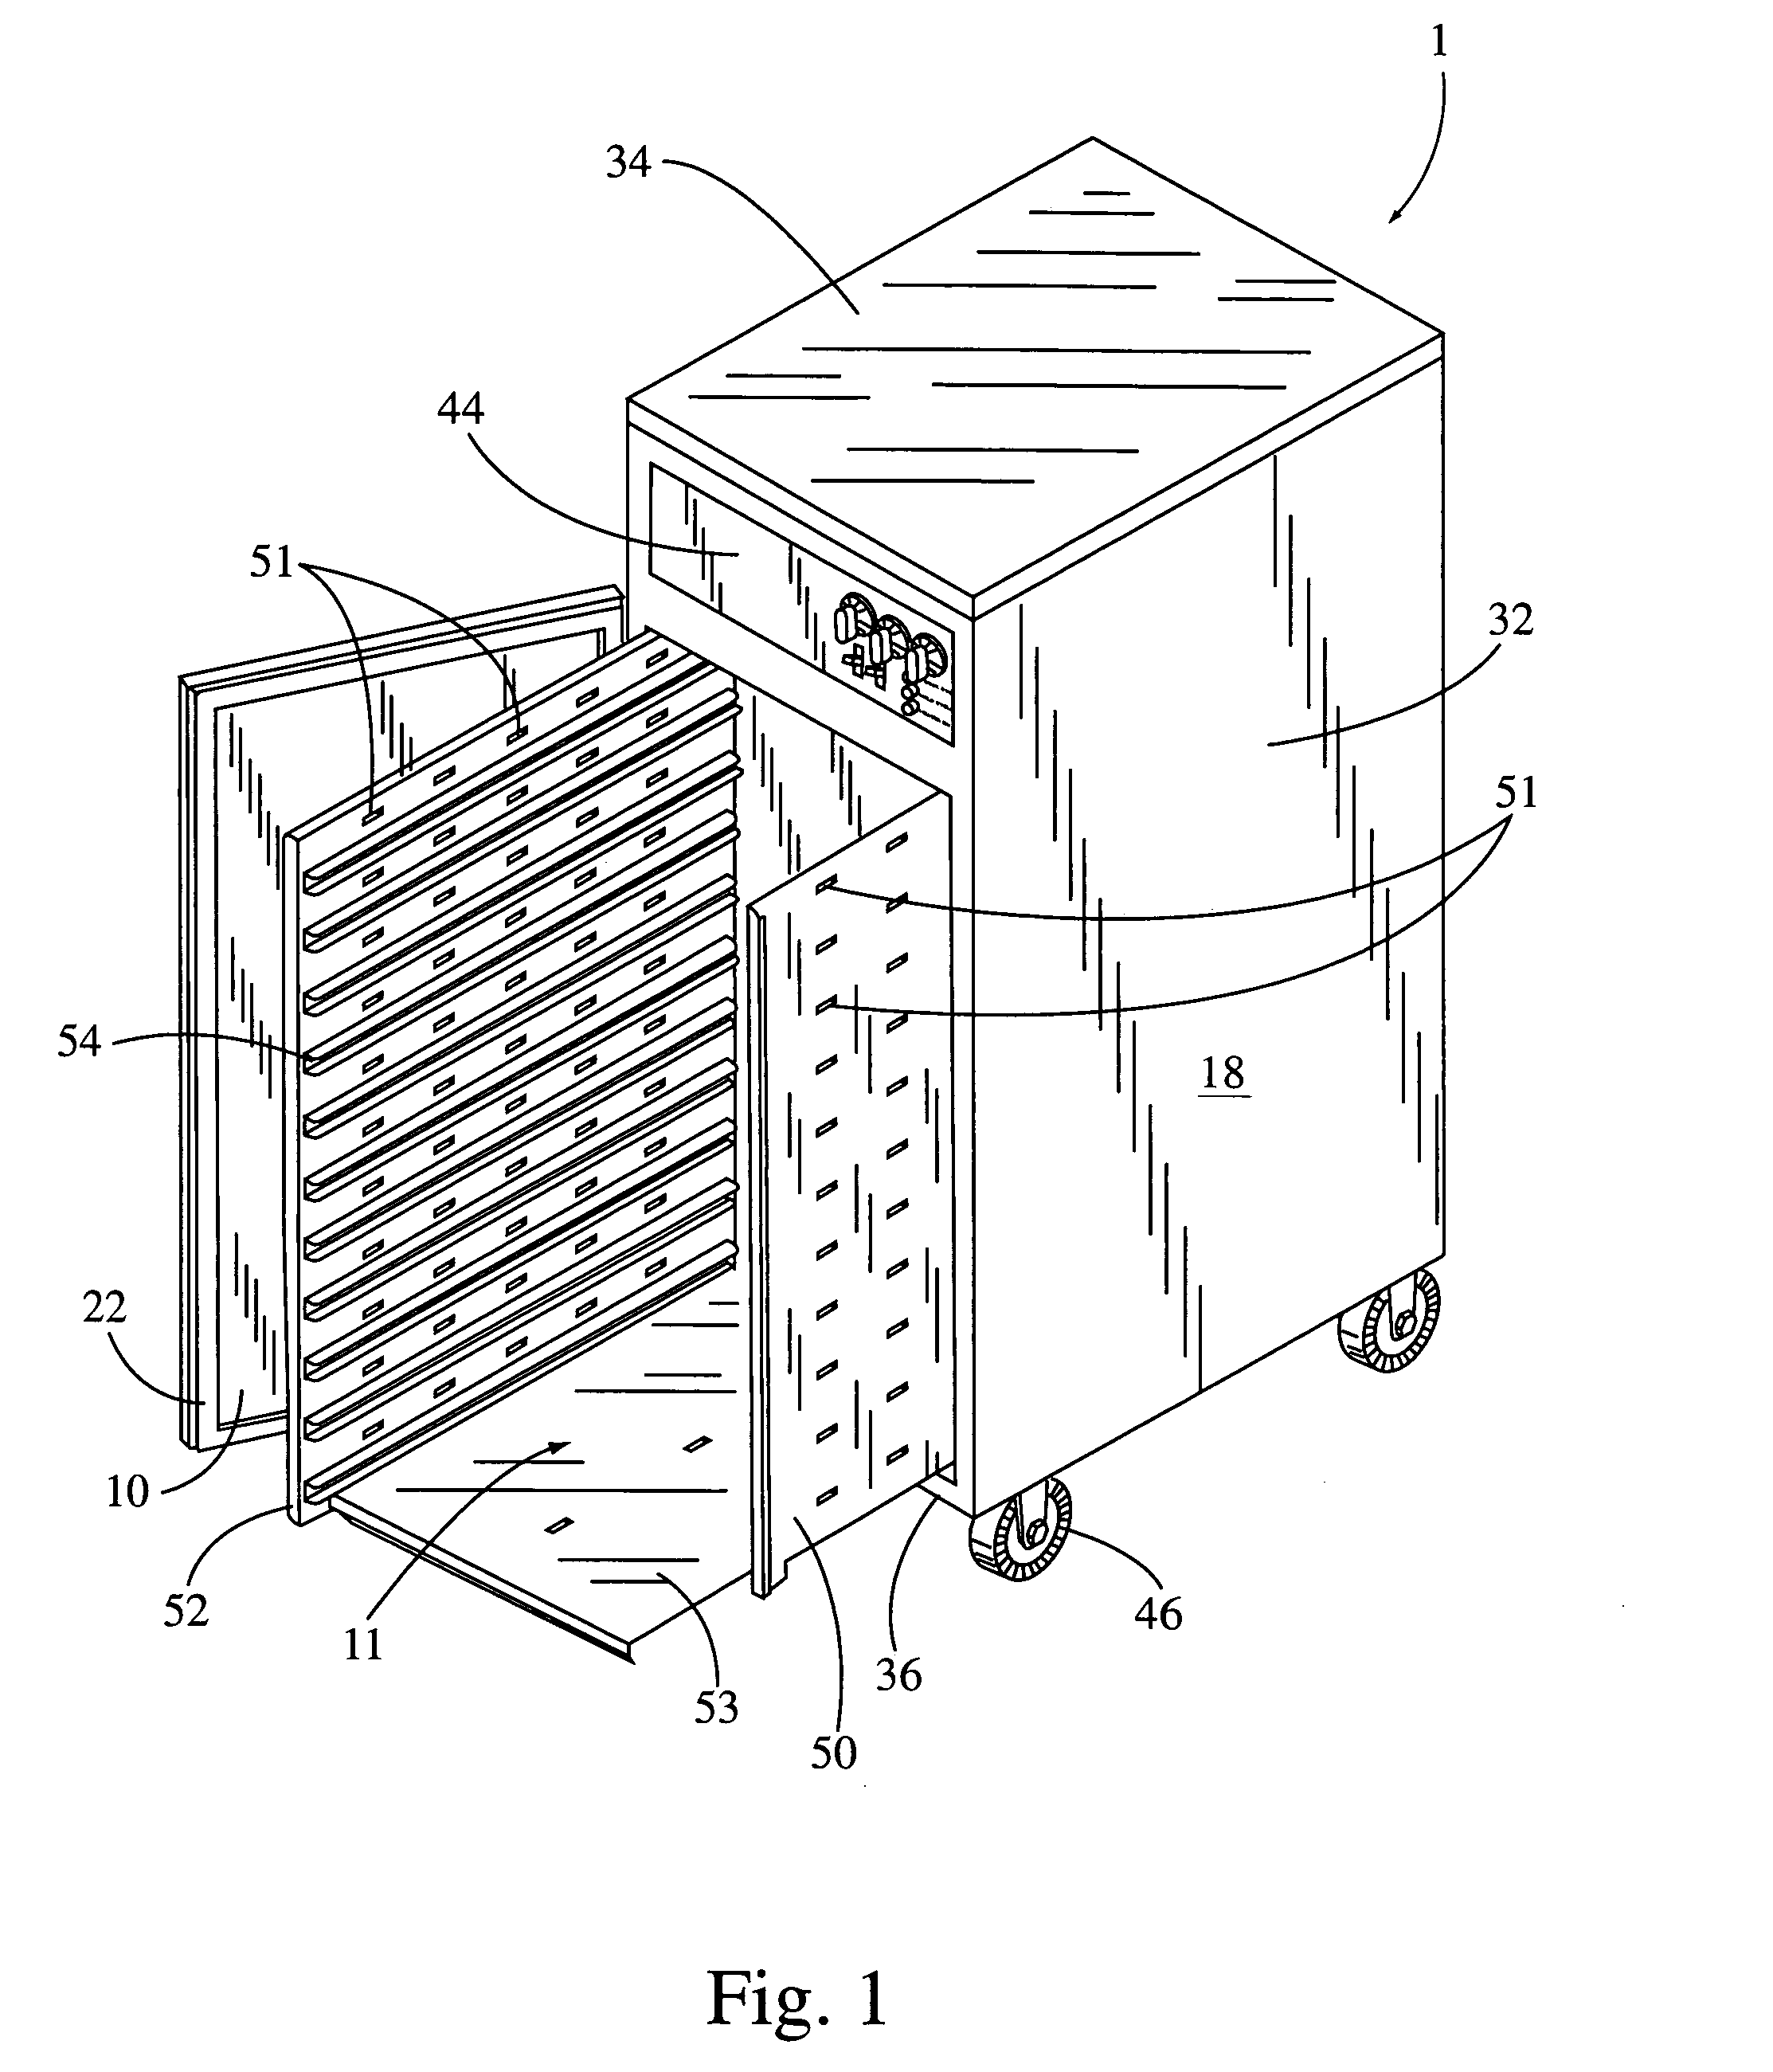 Food cooking and heating apparatus